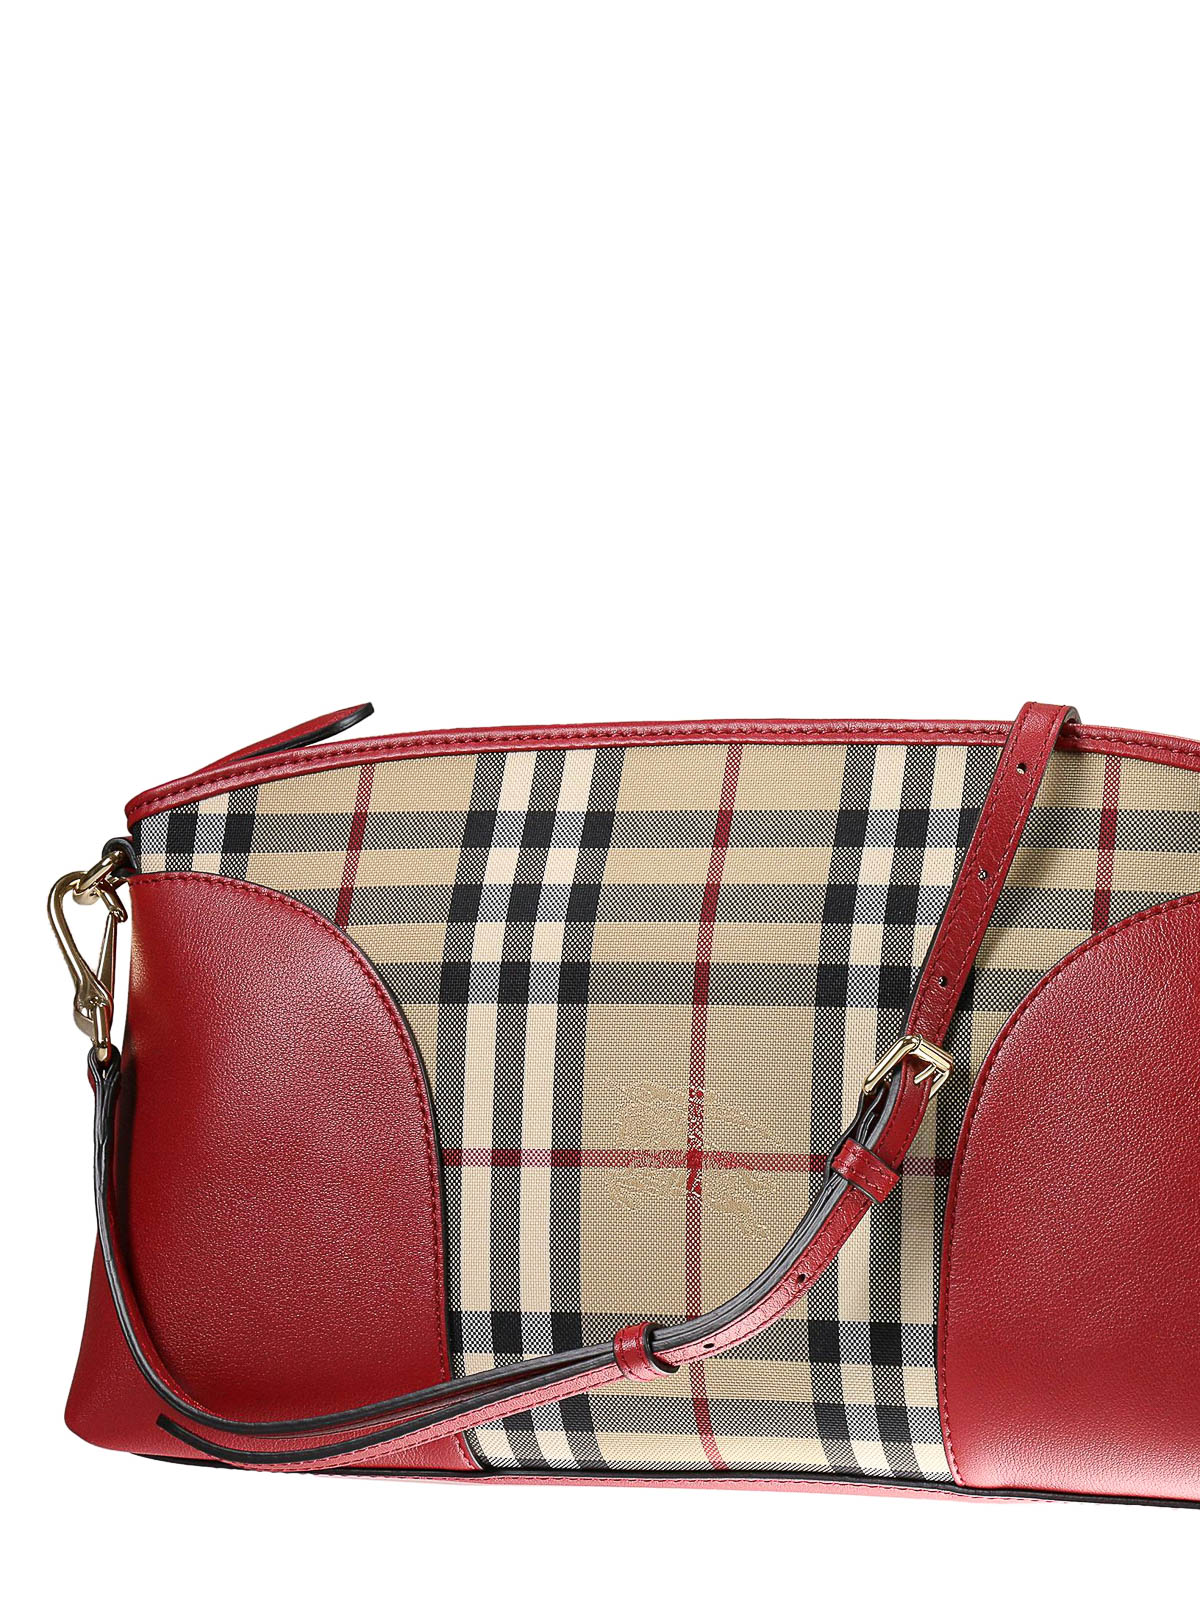 Cross body bags Burberry - Horseferry Check pattern bag - 39928611